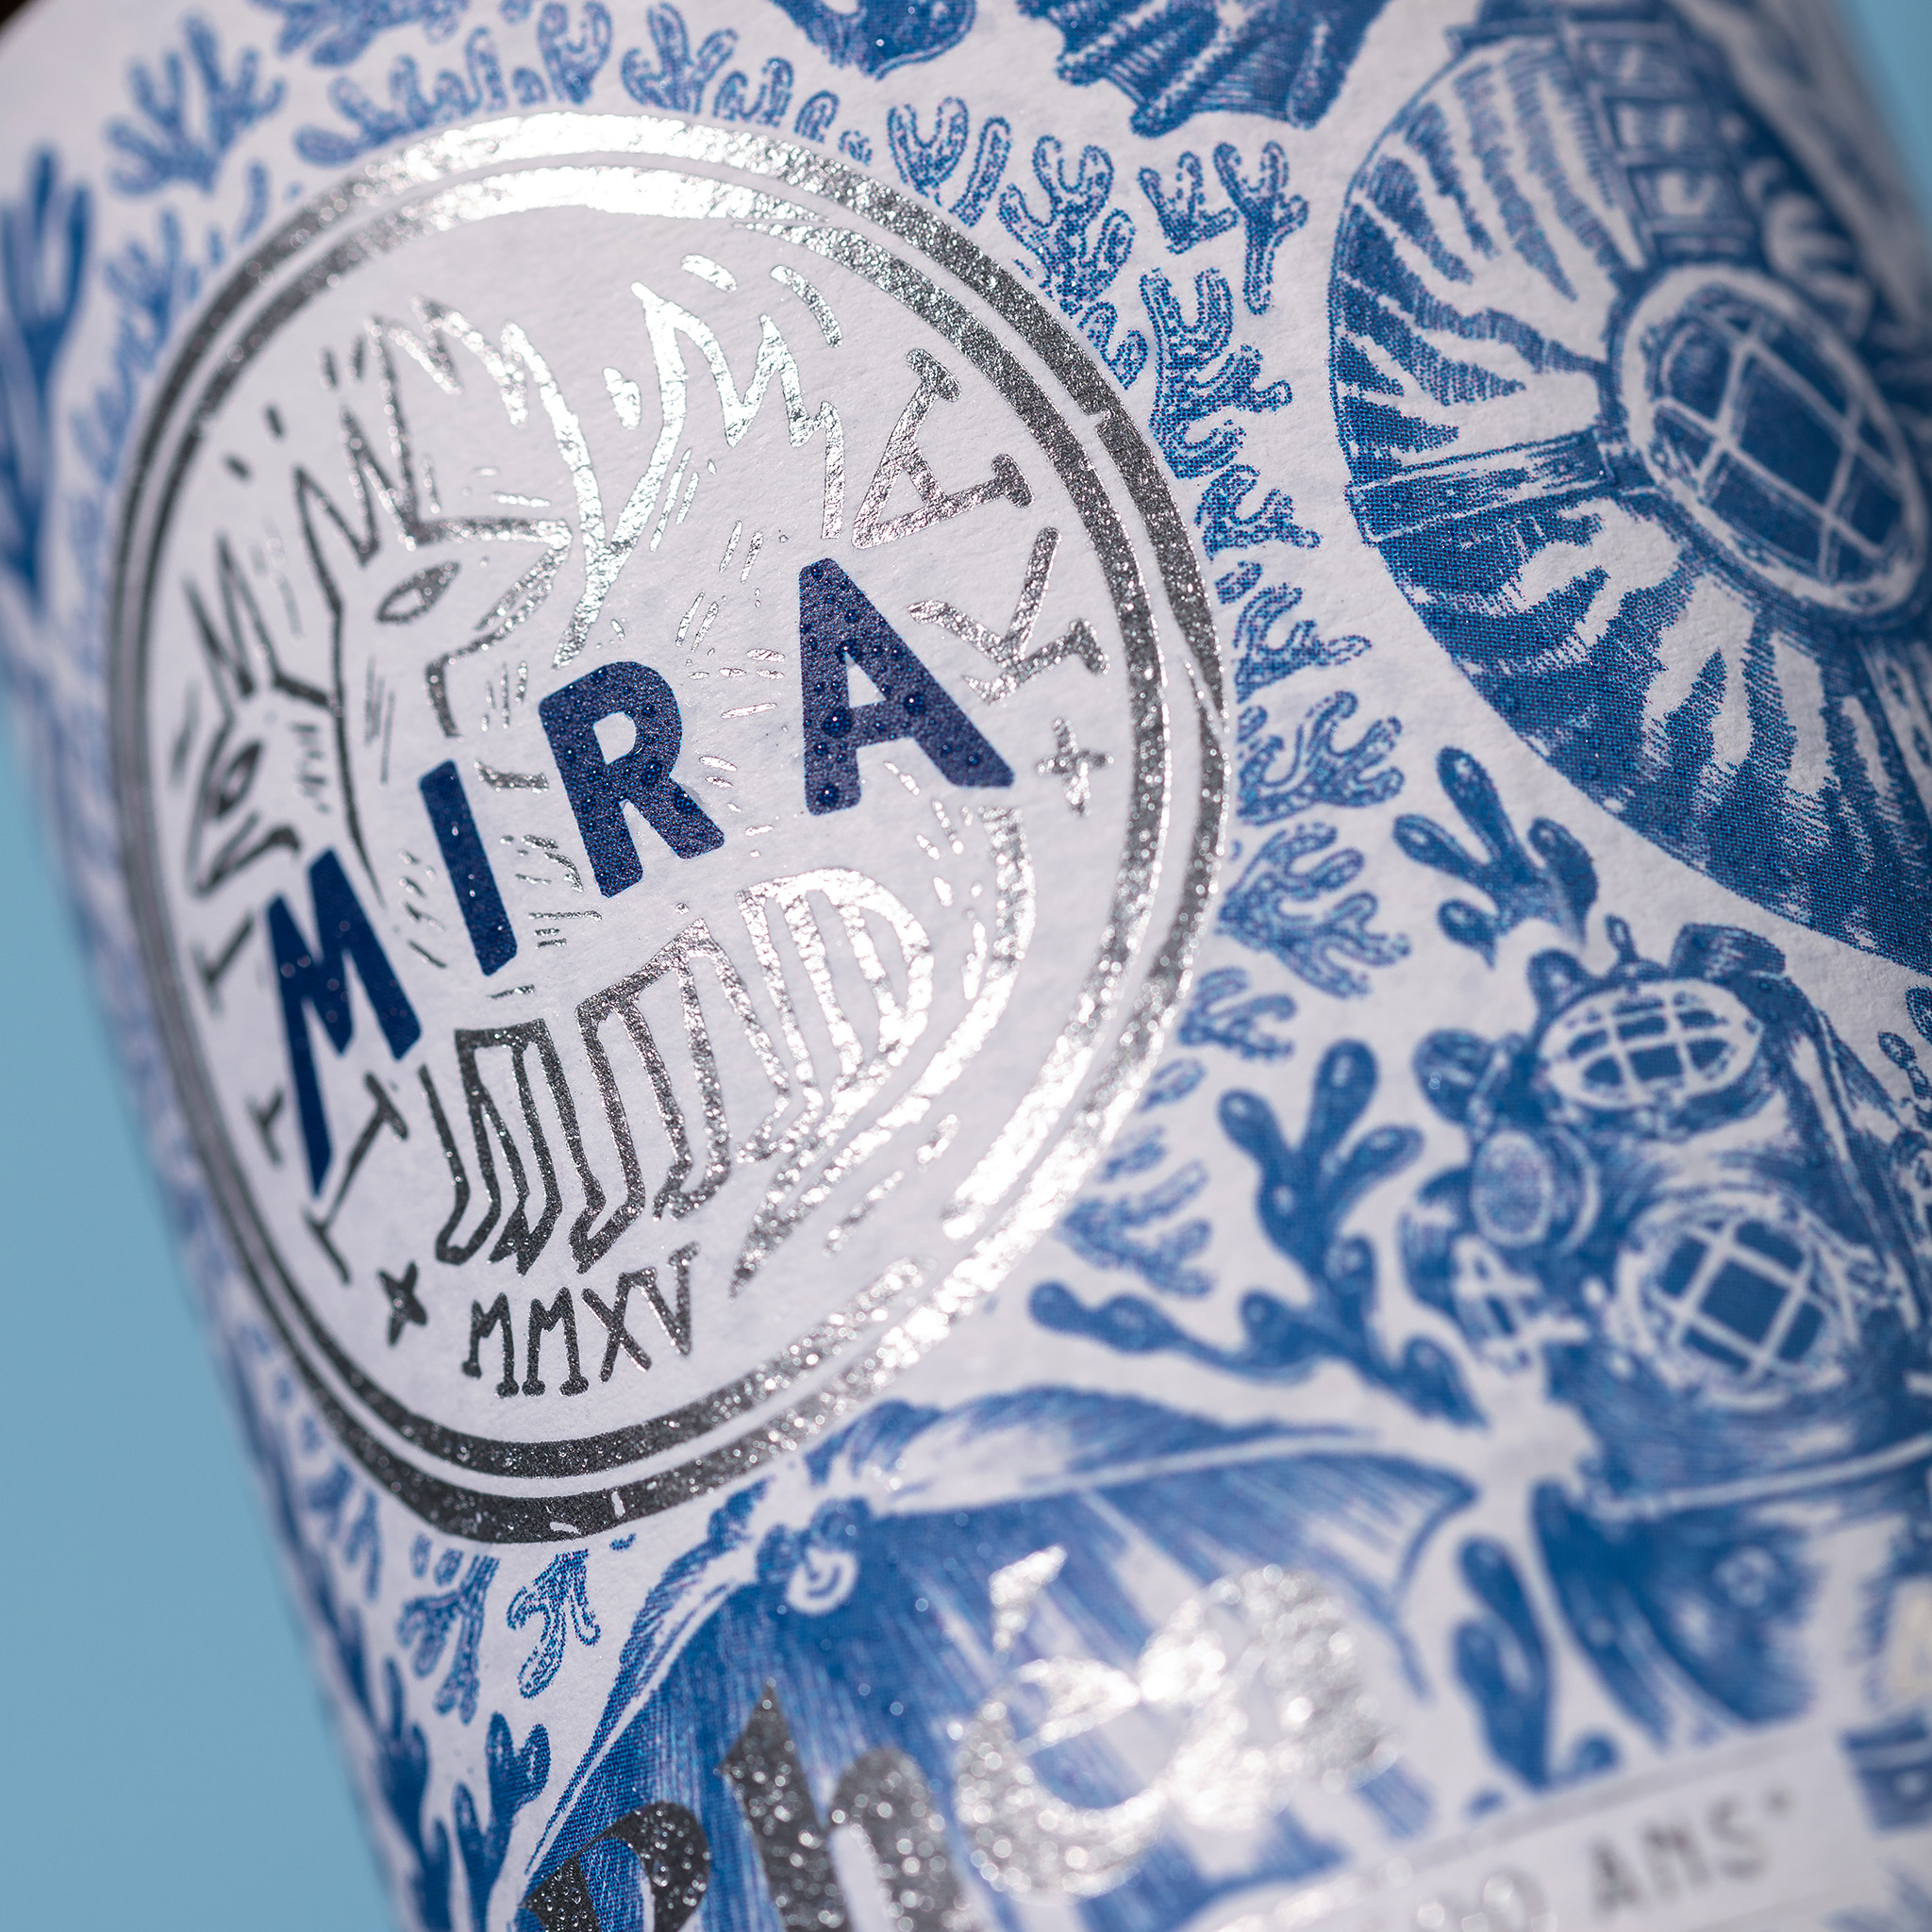 Studio OUAM Create New Label Design for a Beer Dedicated to Sea Food from Mira Brewery